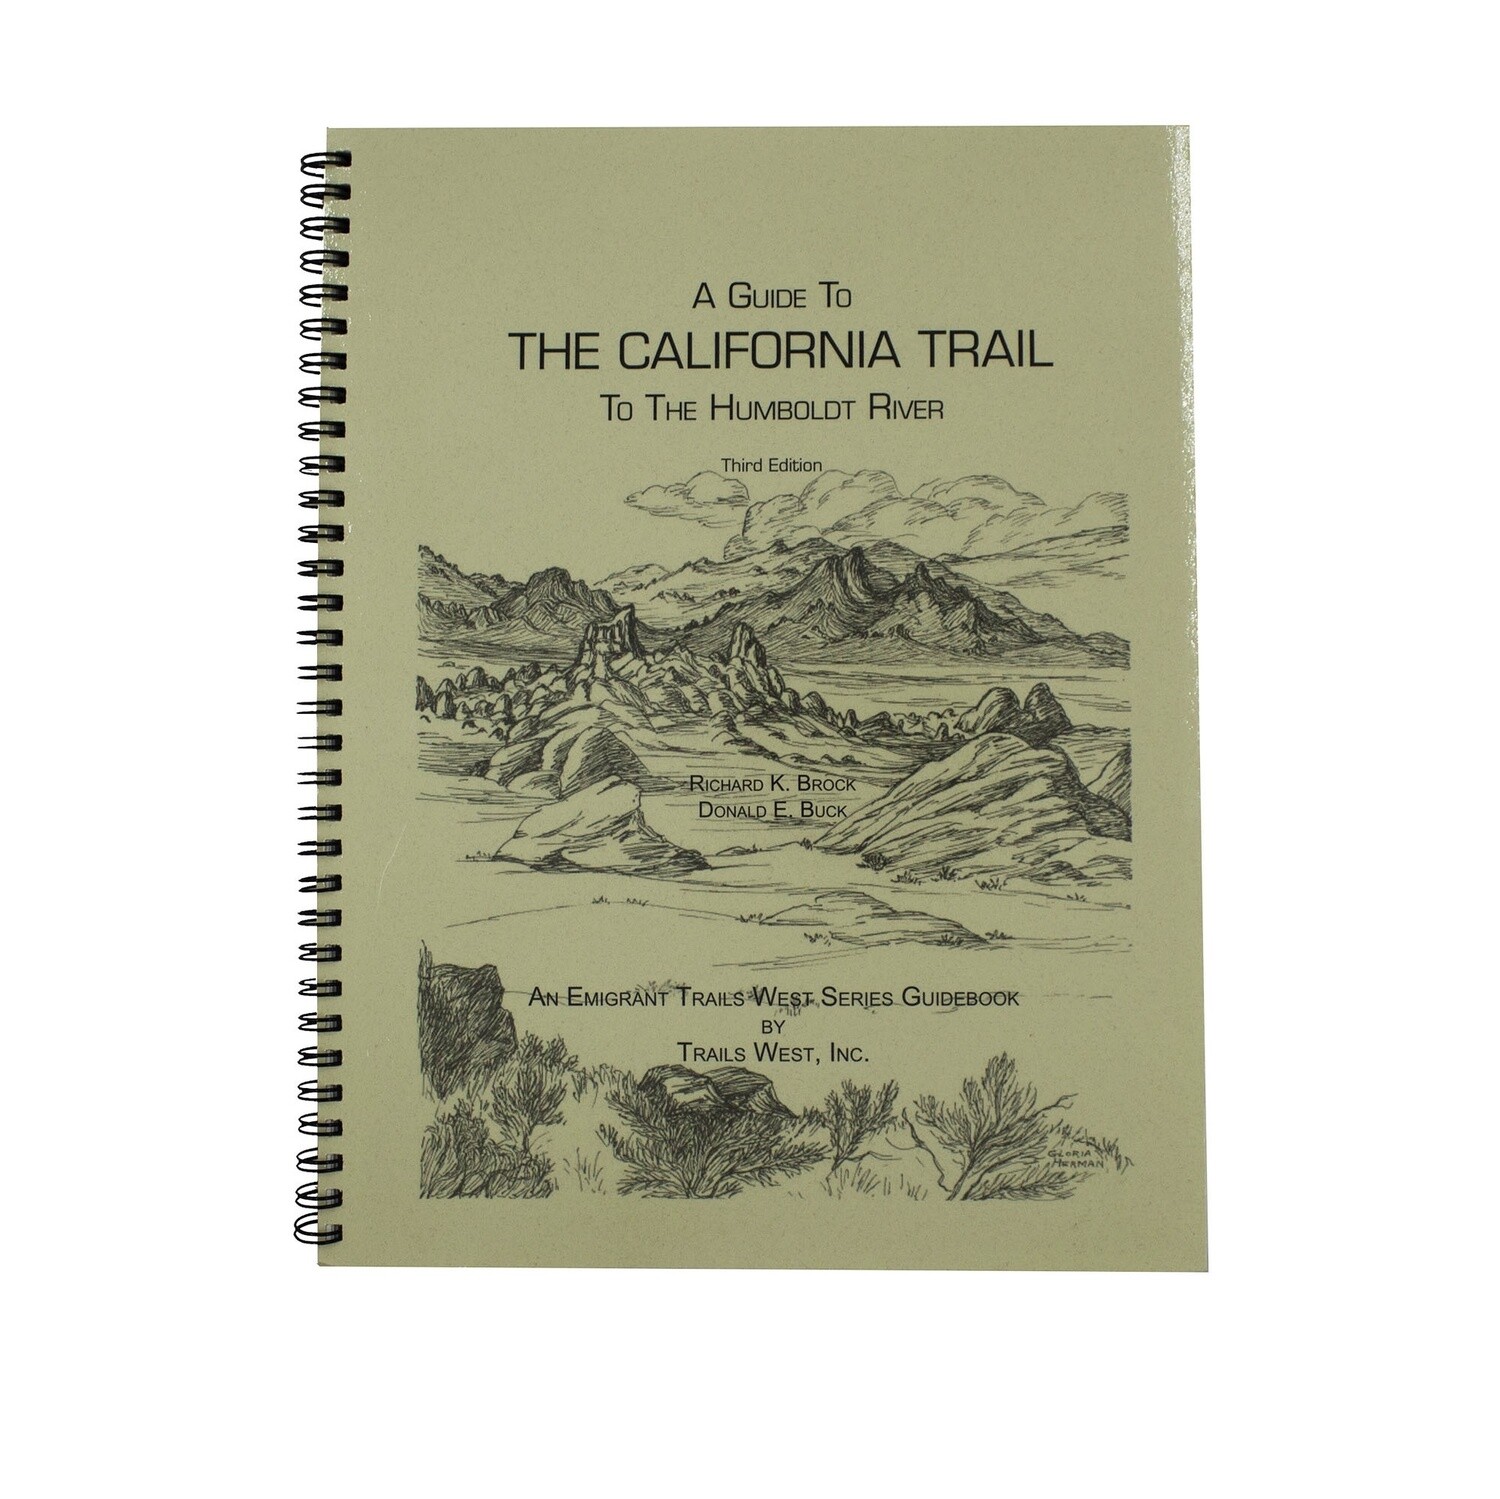 An Emigrant Trails West Series Guidebook by Trail West, Inc.